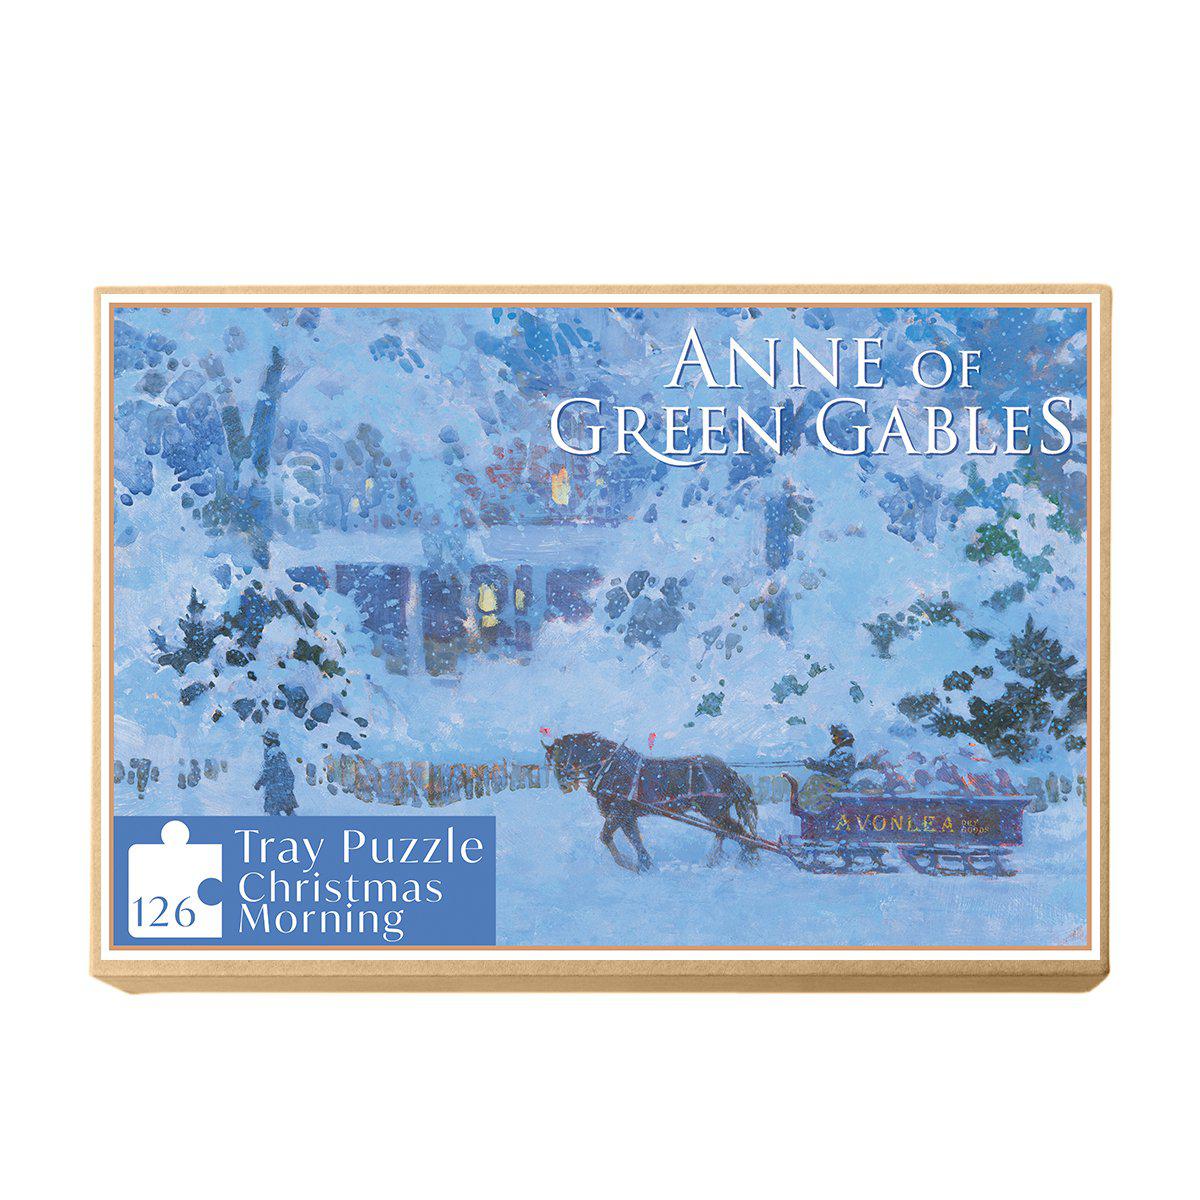 Anne of Green Gables "Christmas Morning" Puzzle